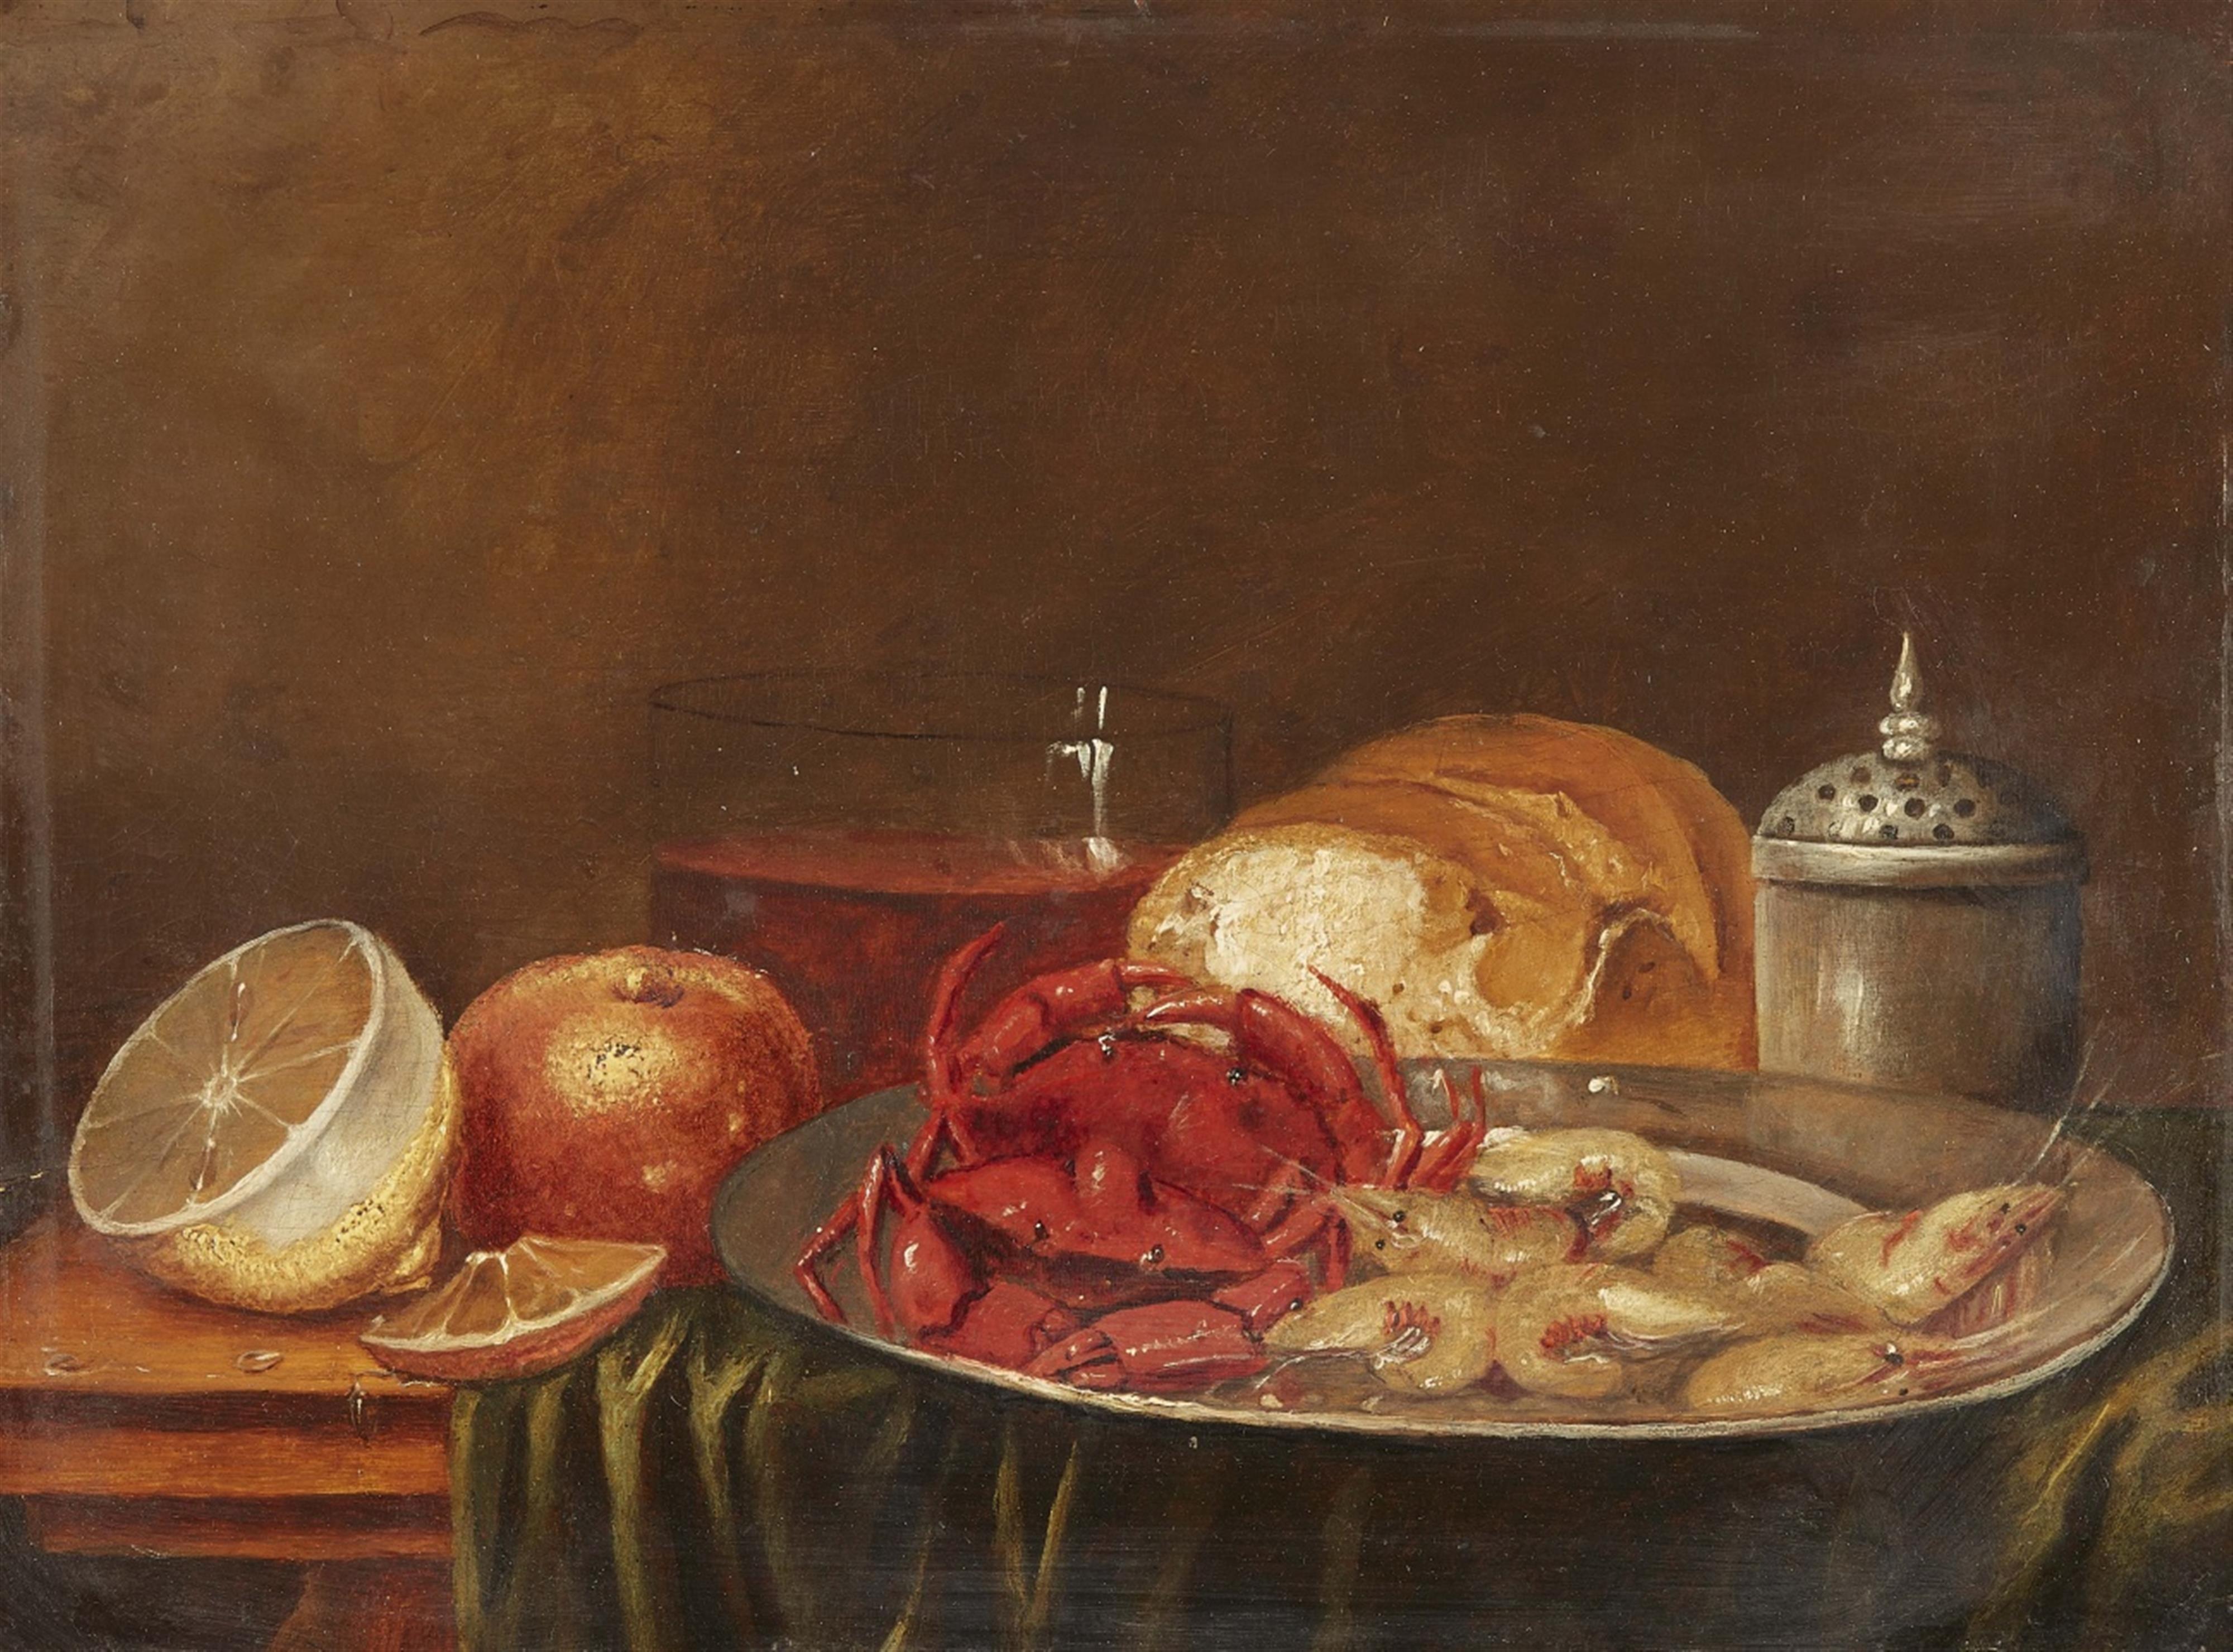 Netherlandish School 17th century - Still Life with a Crab and Shrimps, Bread, a Glass of Wine, and a Lemon - image-1